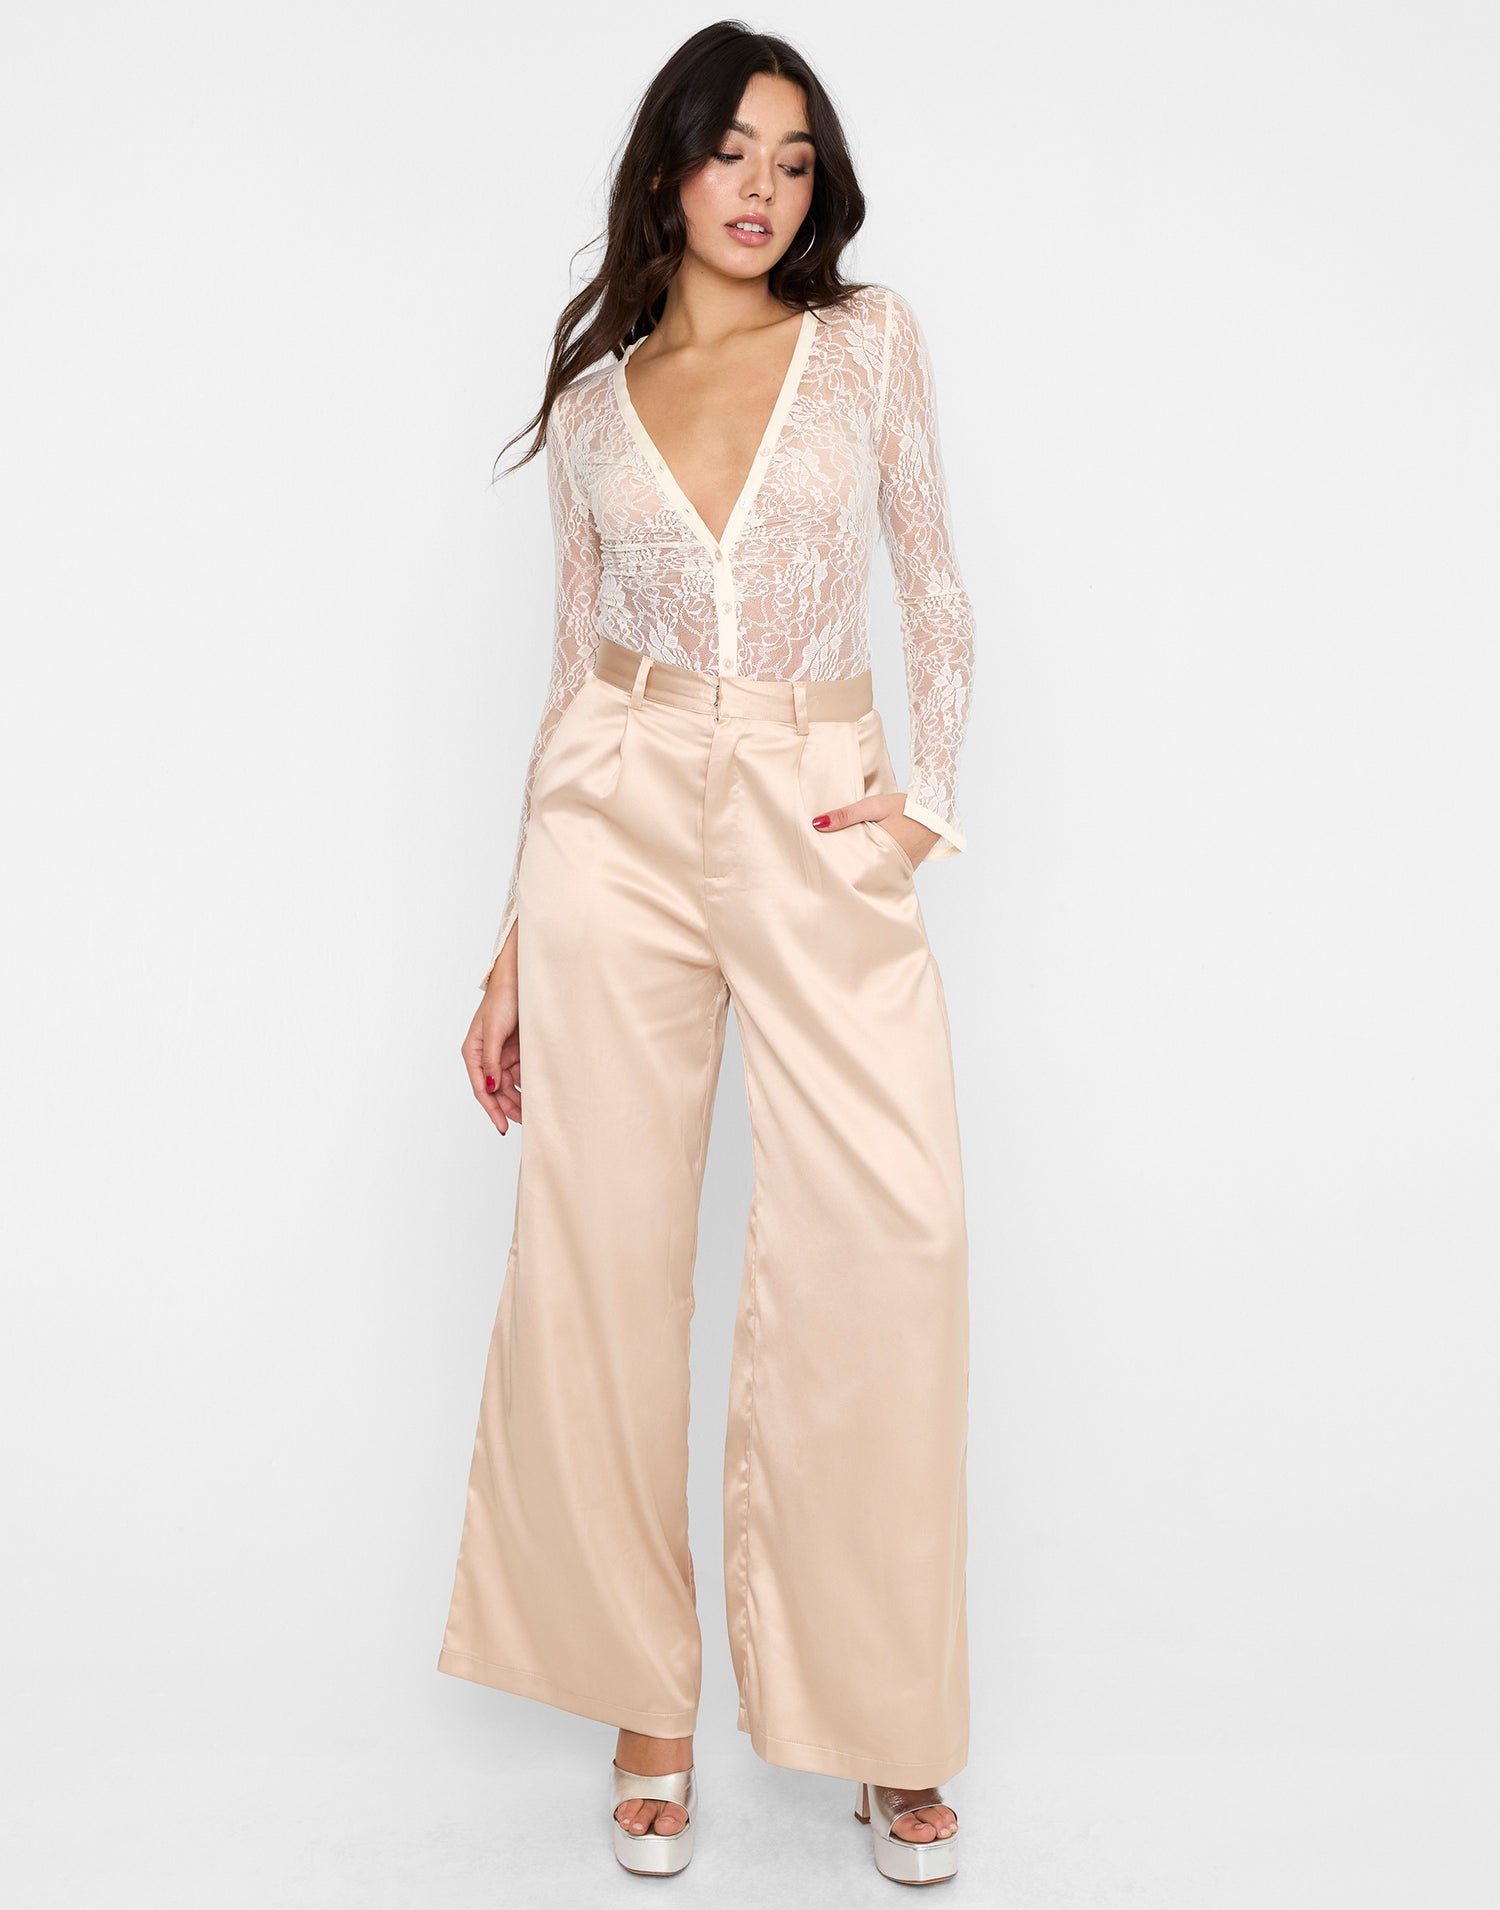 Hadley Satin Trouser by Summer Haus in Latte - Alternate Front View